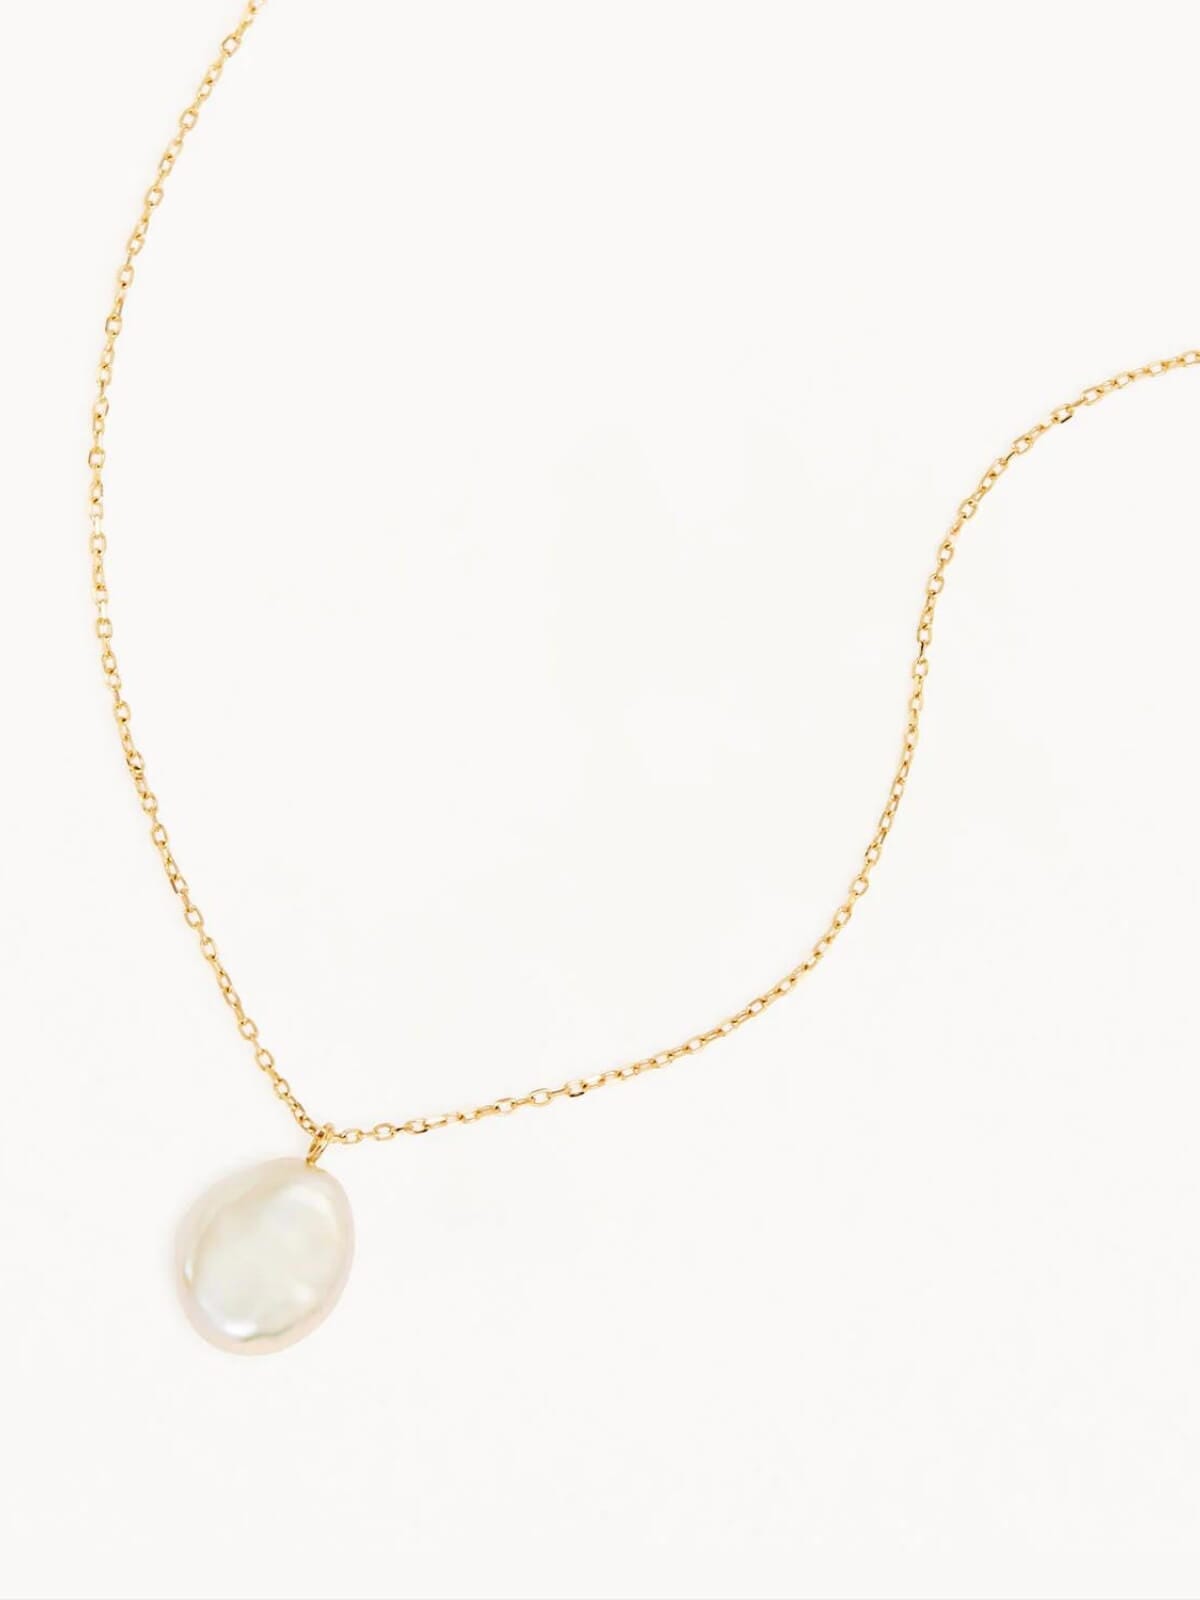 By Charlotte | 14k Gold Tranquillity necklace | Perlu